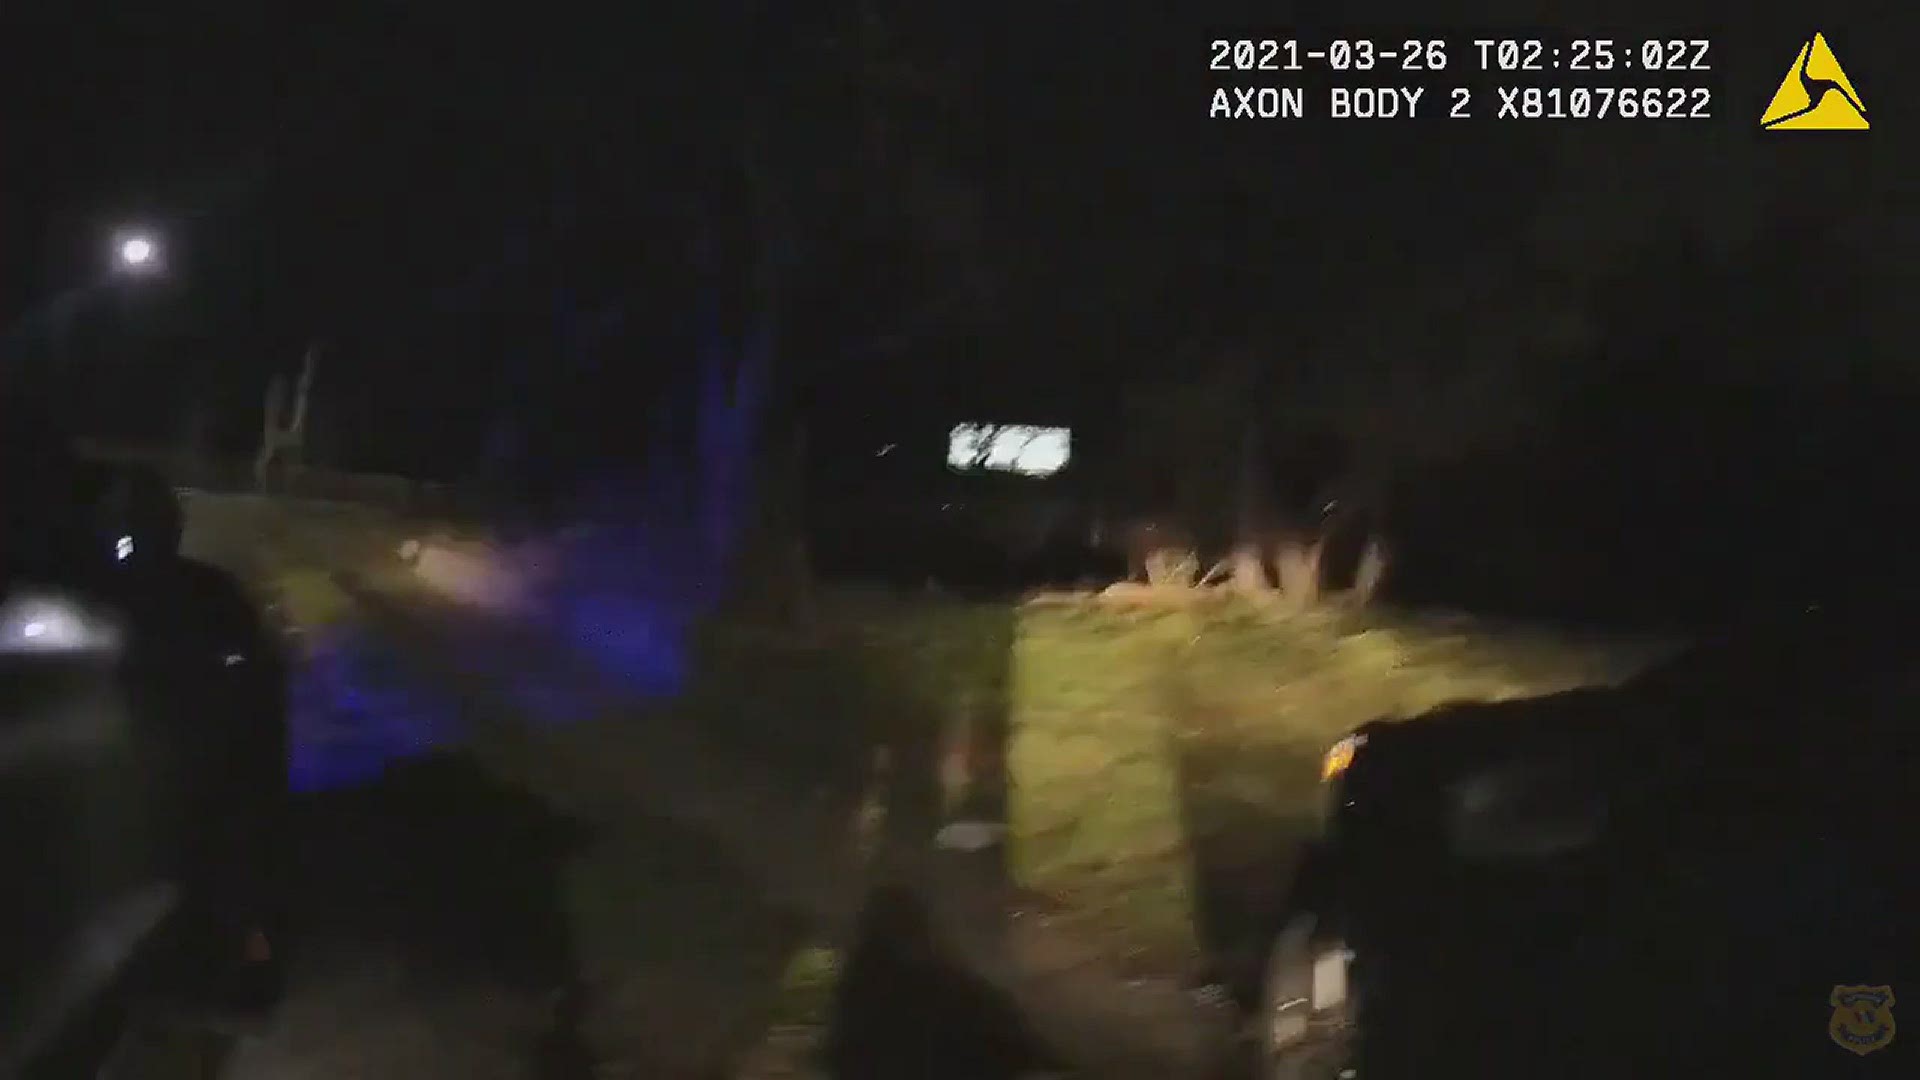 Two new body camera videos released by police shows the arrest of Saints CB Marshon Lattimore this March.